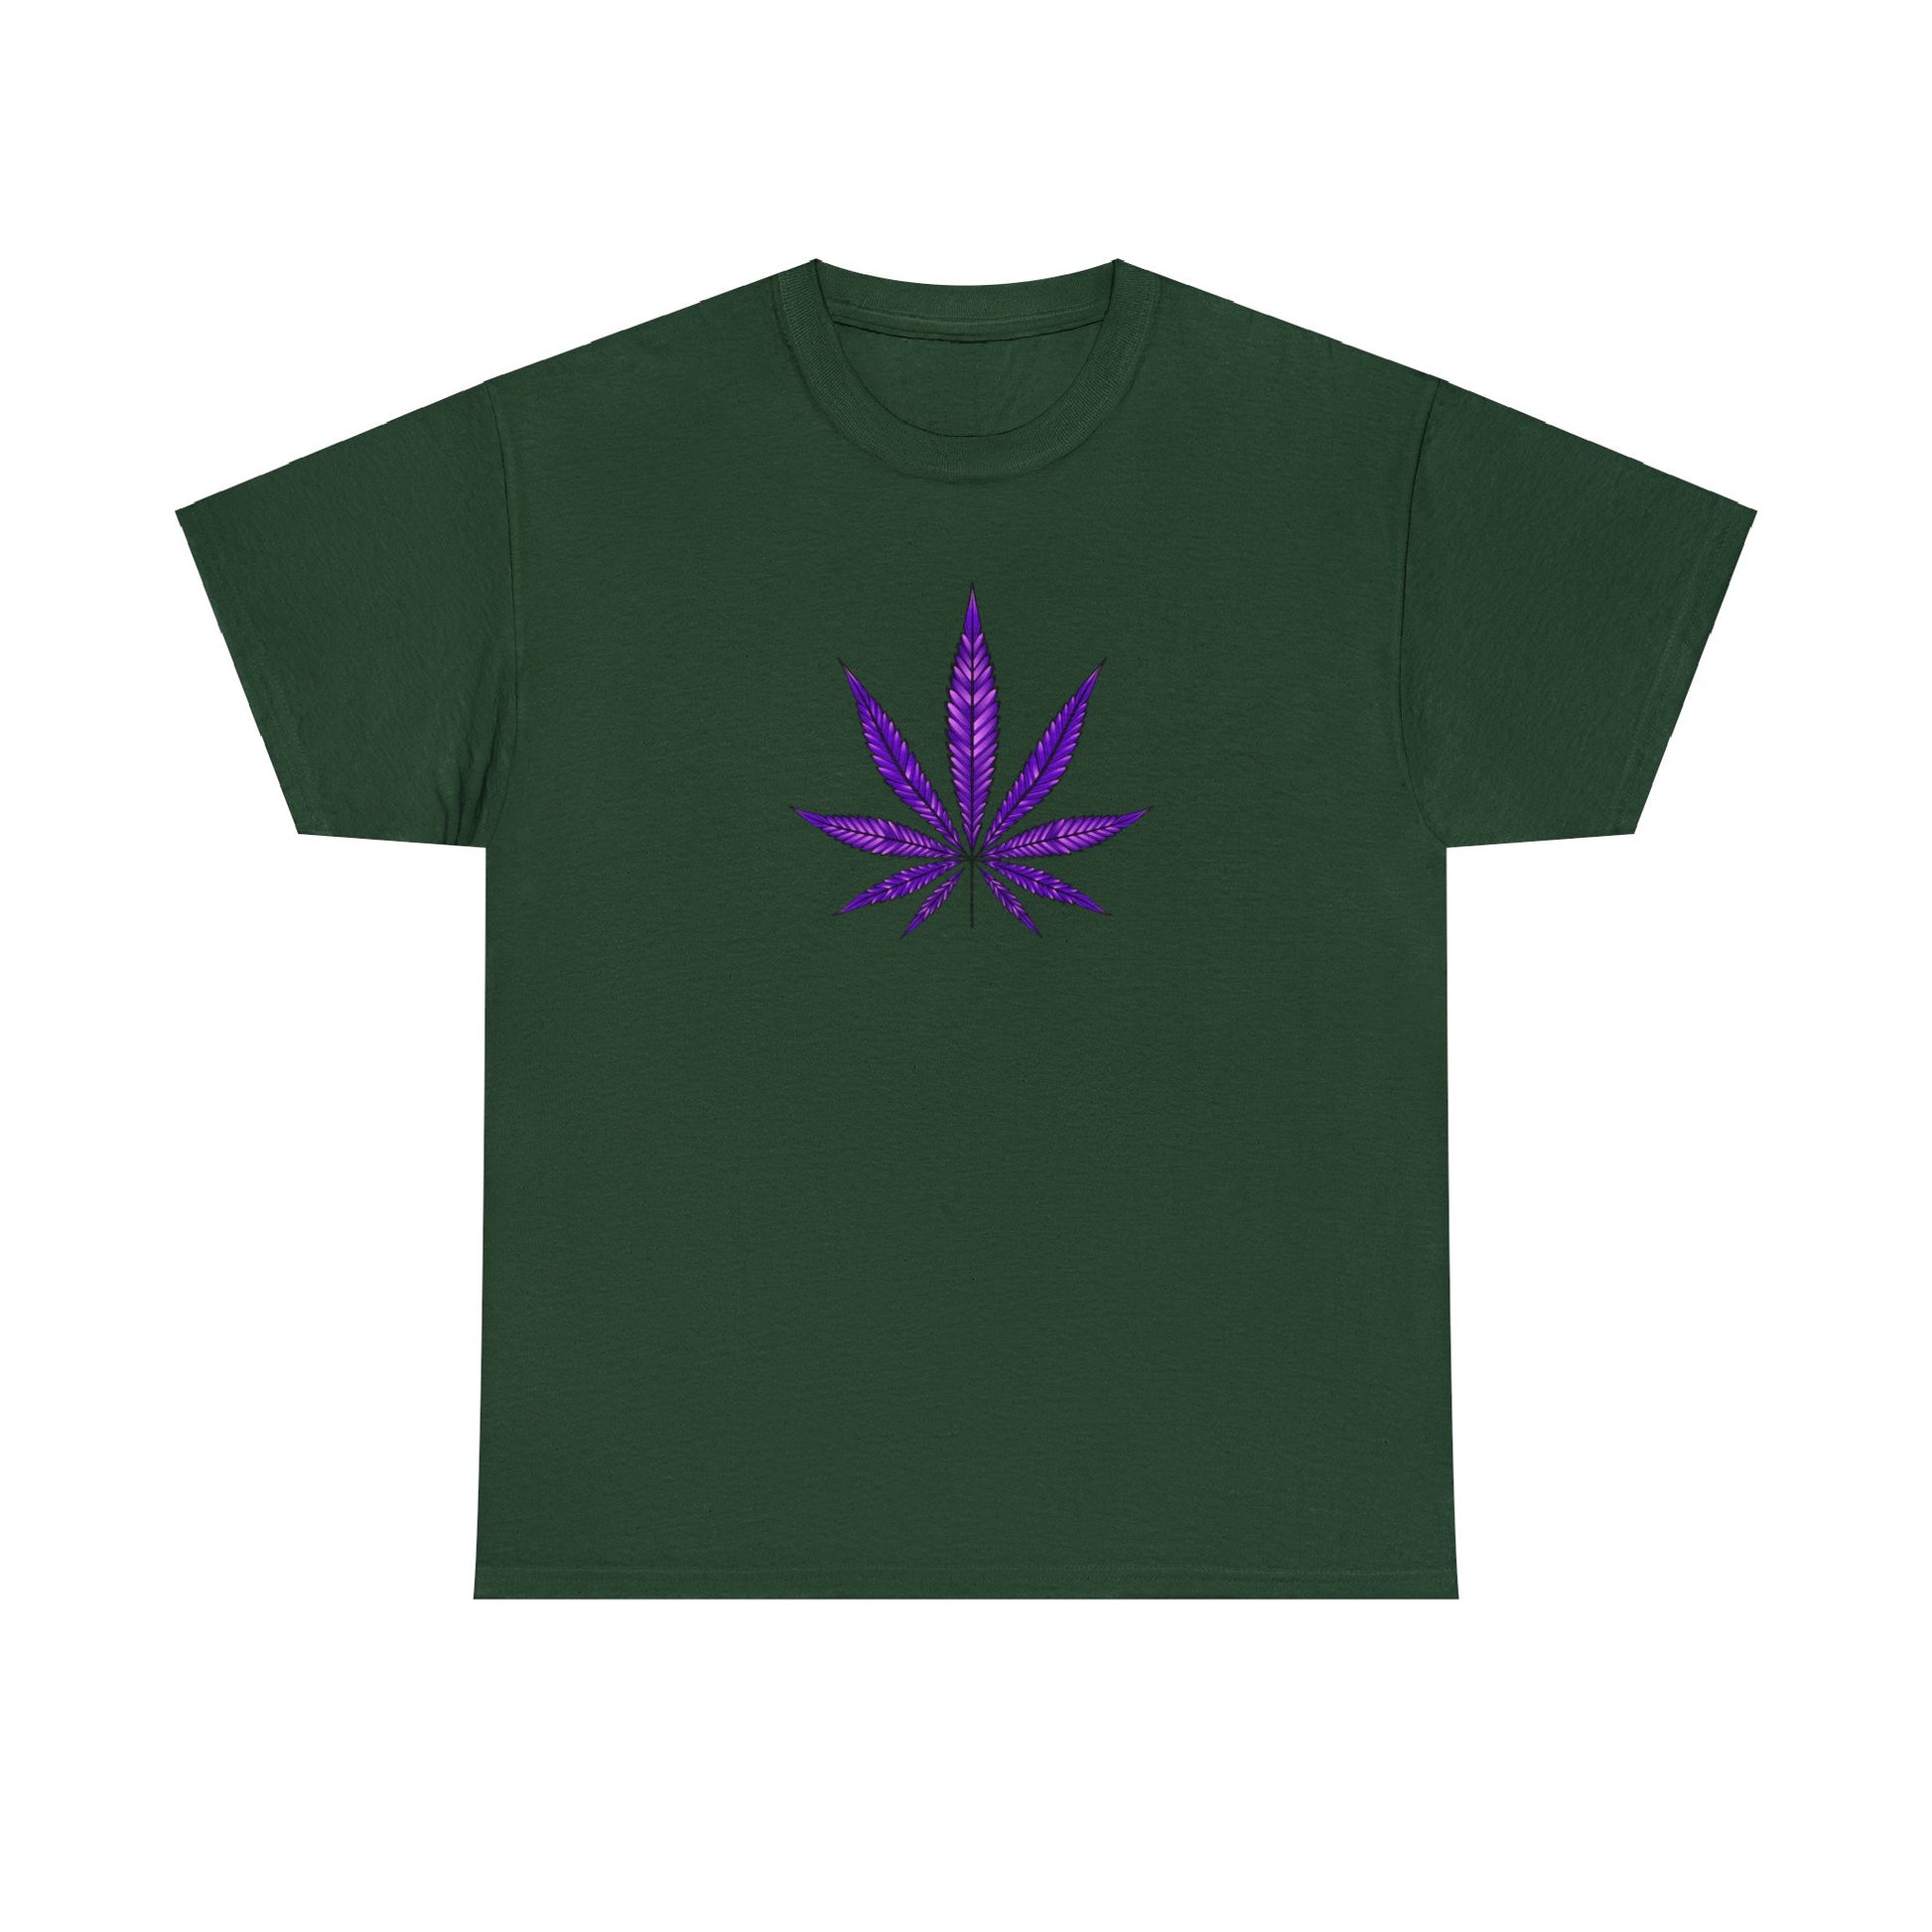 Vibrant color plain green Purple Cannabis Leaf Tee with a purple cannabis leaf graphic on the front, reflecting marijuana culture.